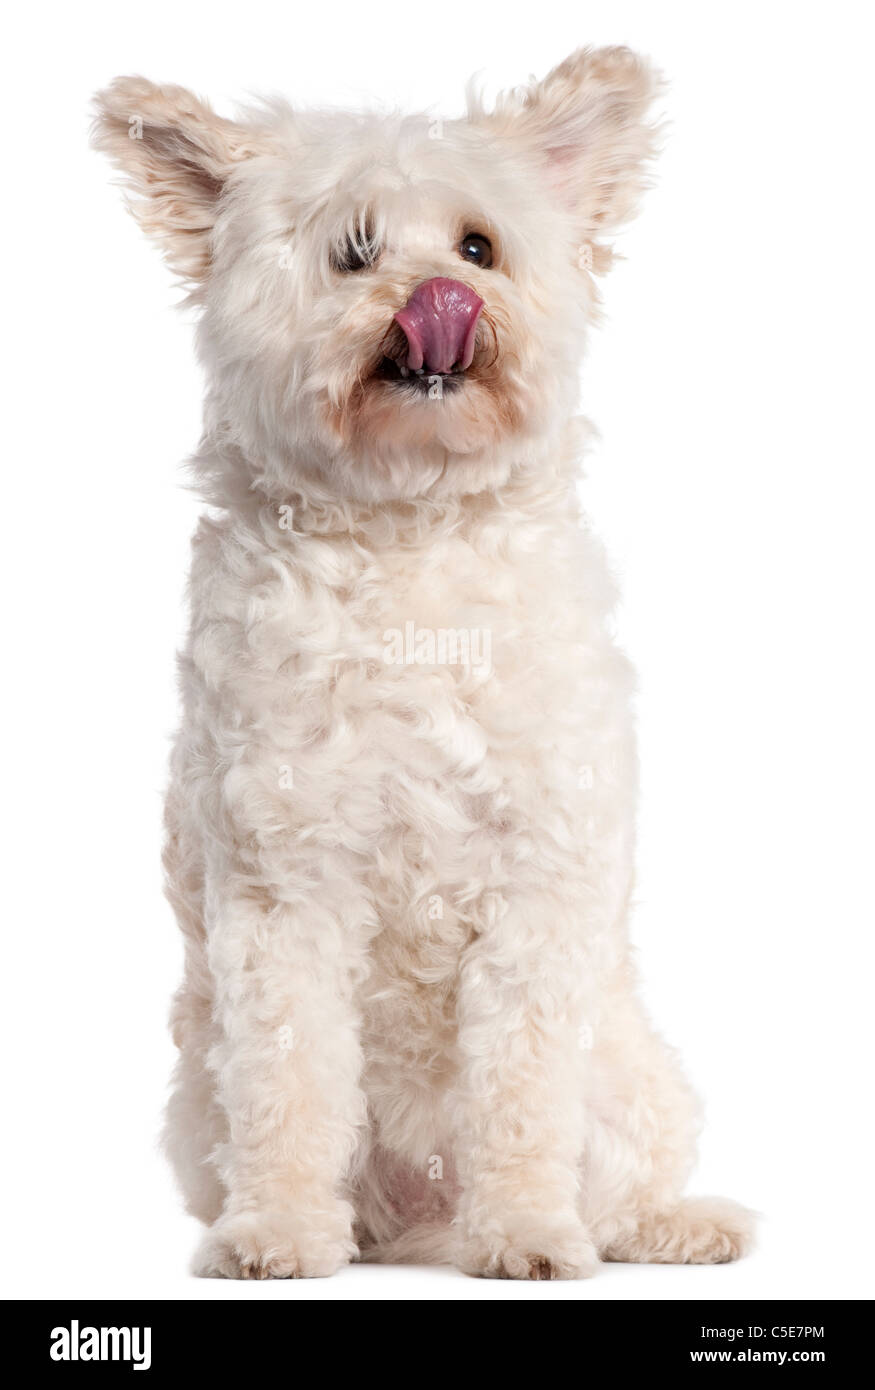 Mixed-breed dog licking nose, 10 years old, in front of white background Stock Photo